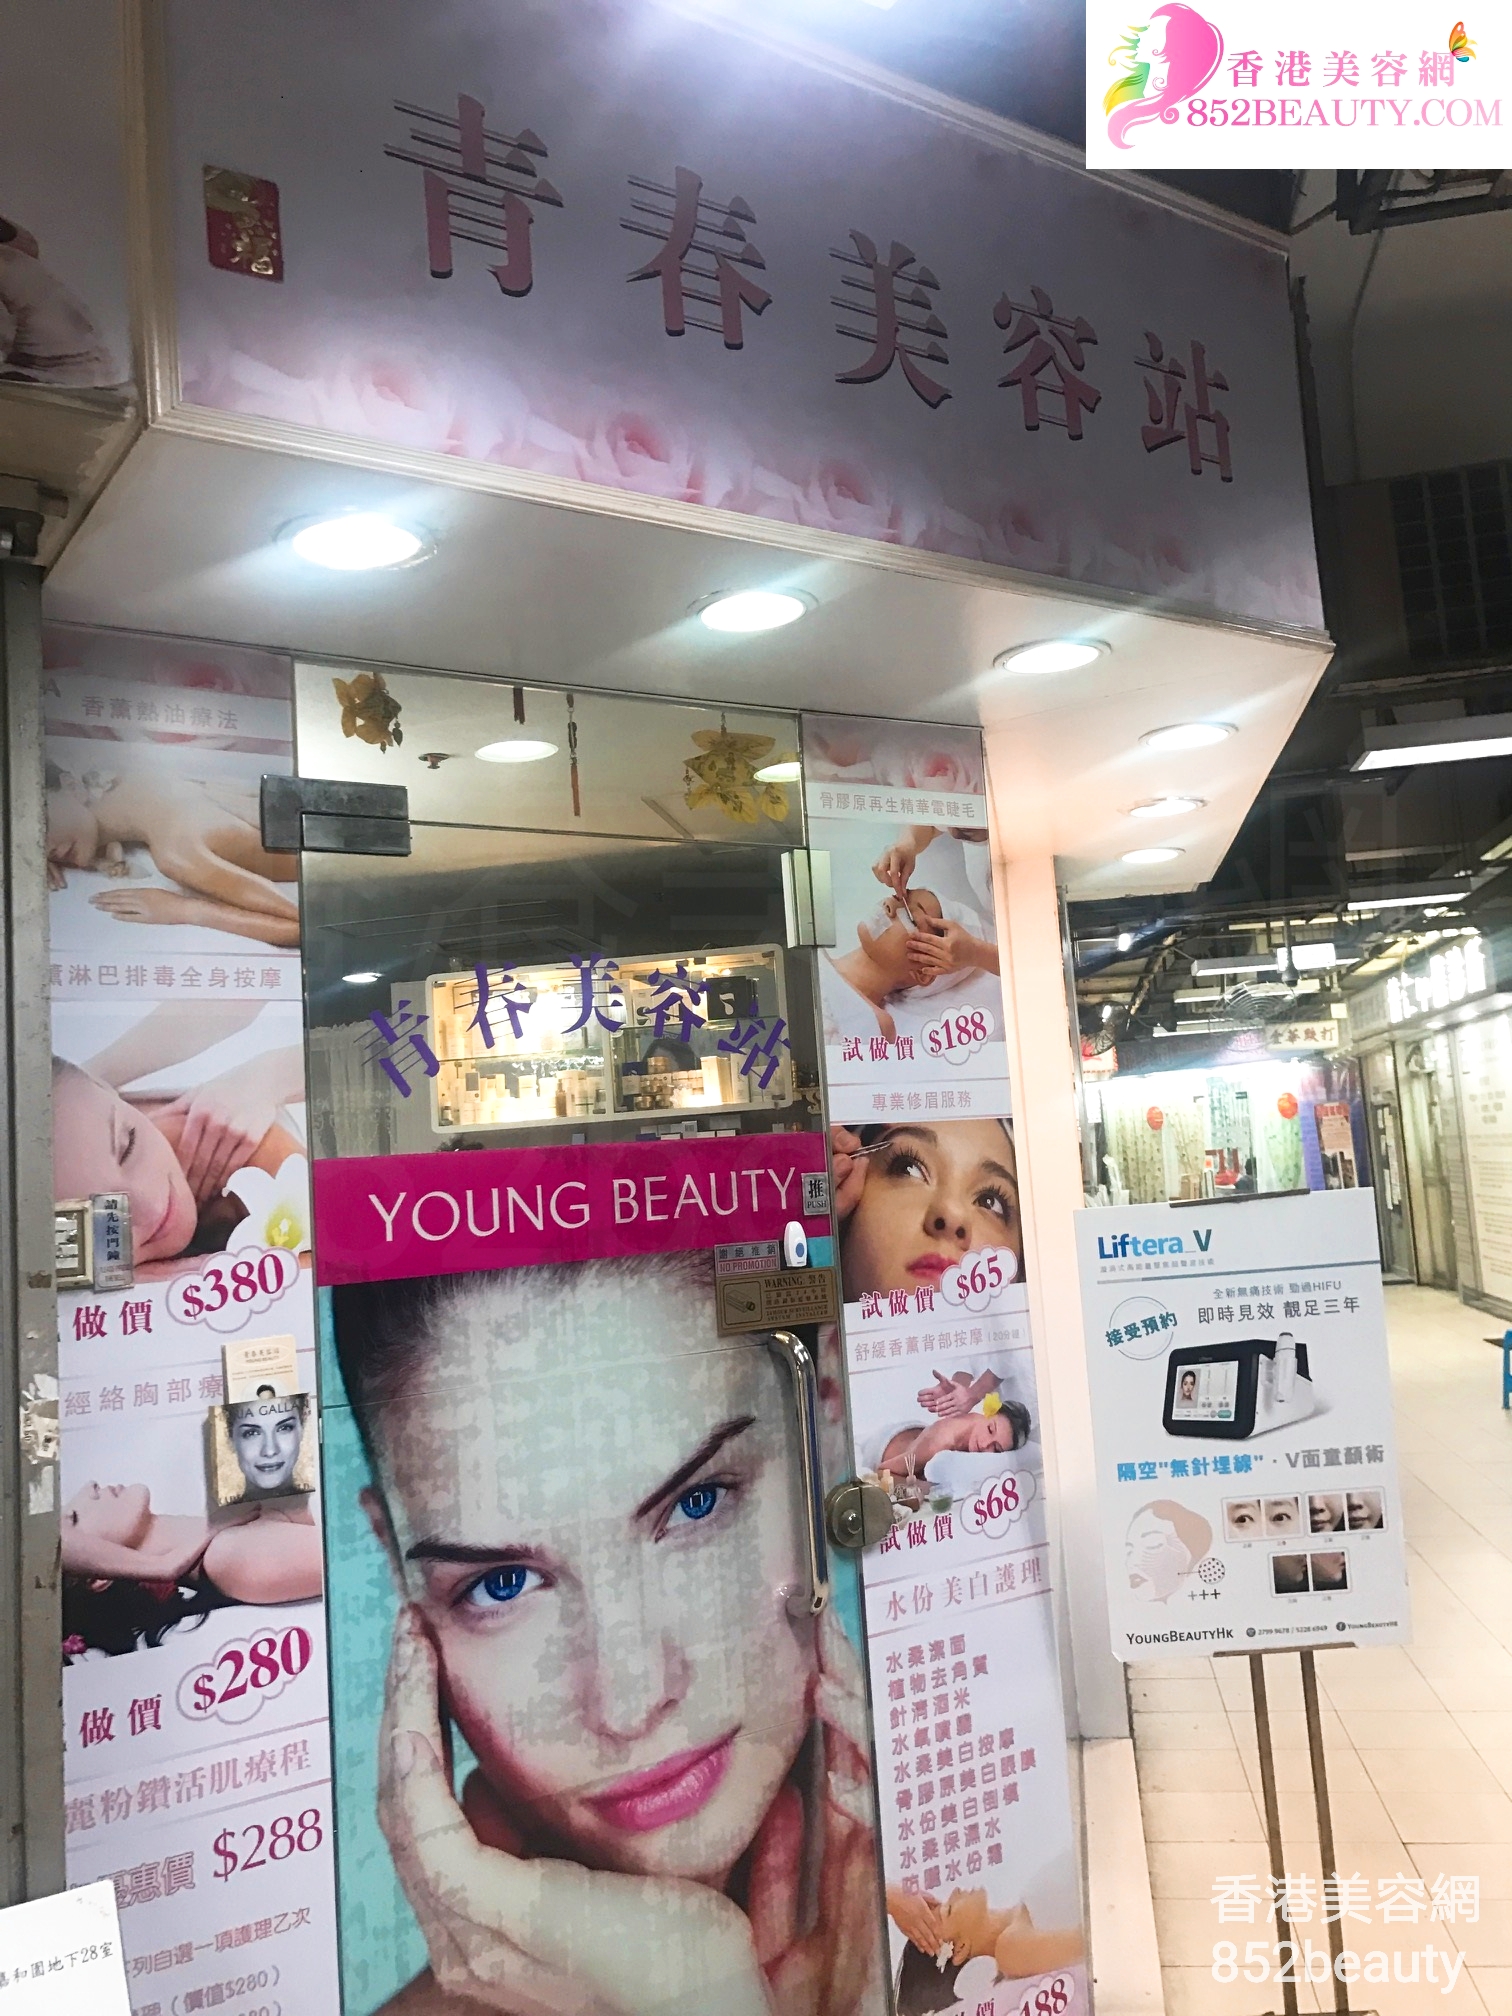 Hair Removal: 青春美容站 Young Beauty